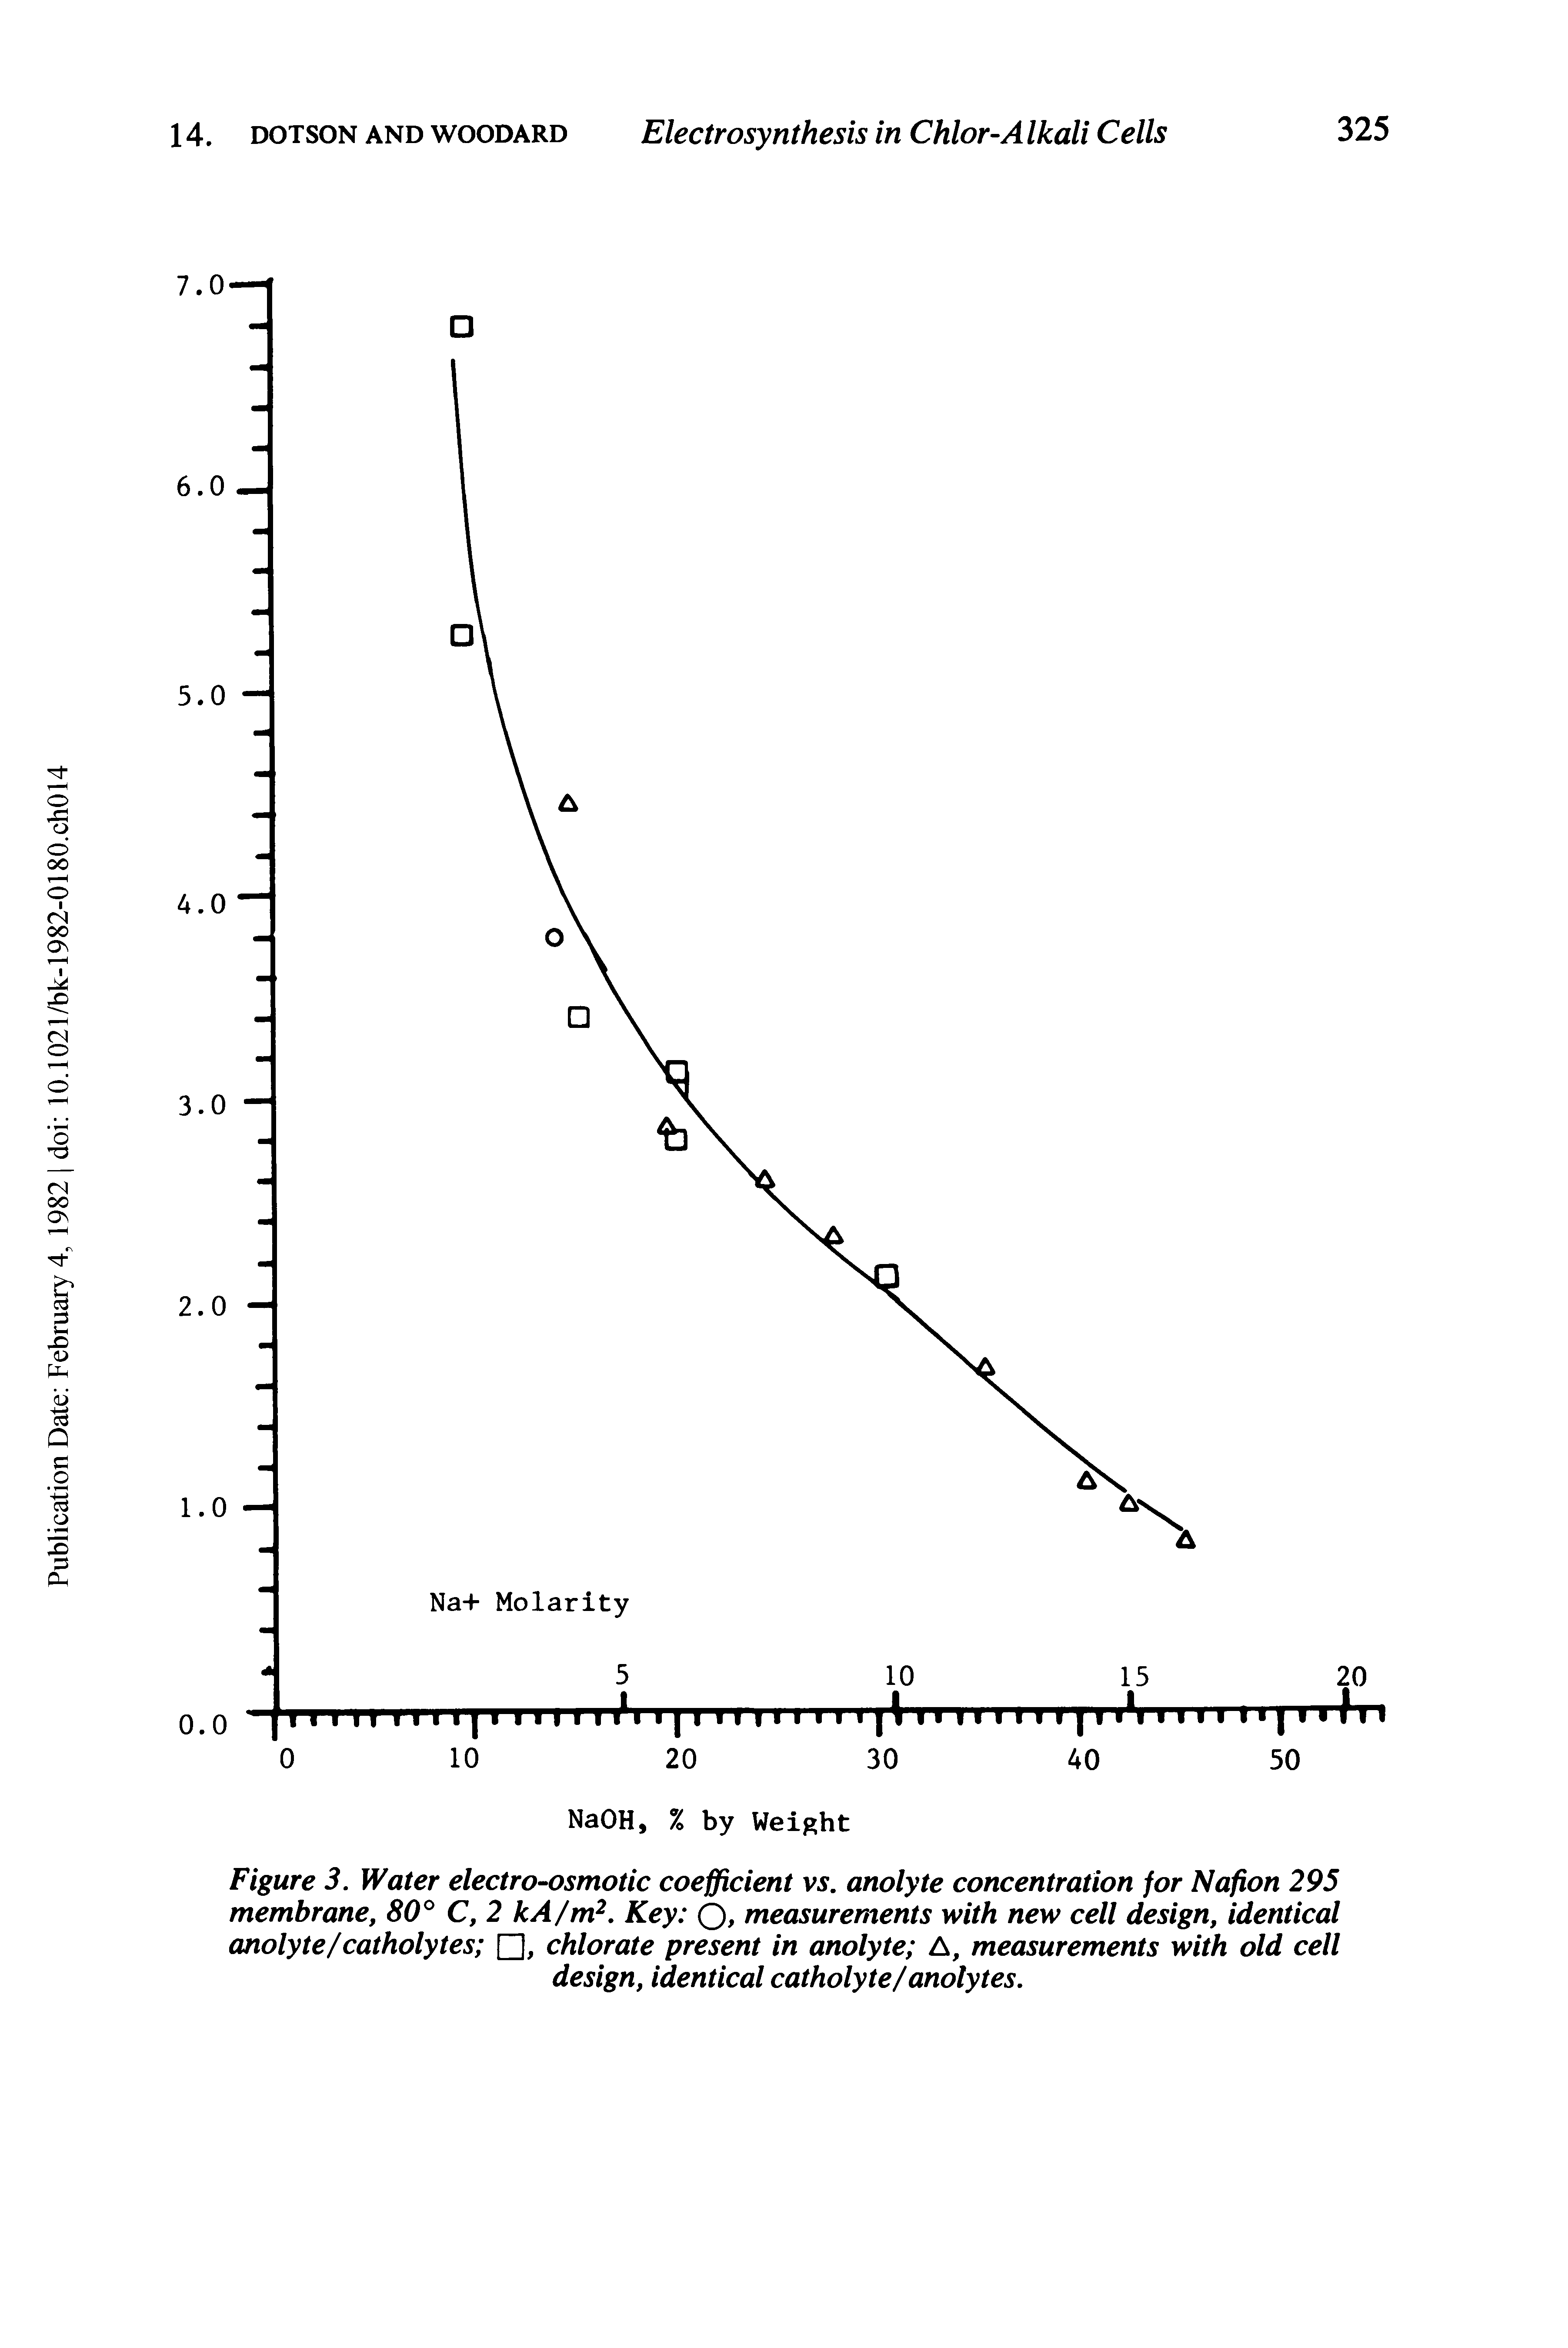 Figure 3. Water electro-osmotic coefficient vs. anolyte concentration for Nafion 295 membrane, 80° C, 2 kA/m2. Key Q, measurements with new cell design, identical anolyte/catholytes , chlorate present in anolyte A, measurements with old cell design, identical catholyte/anolytes.